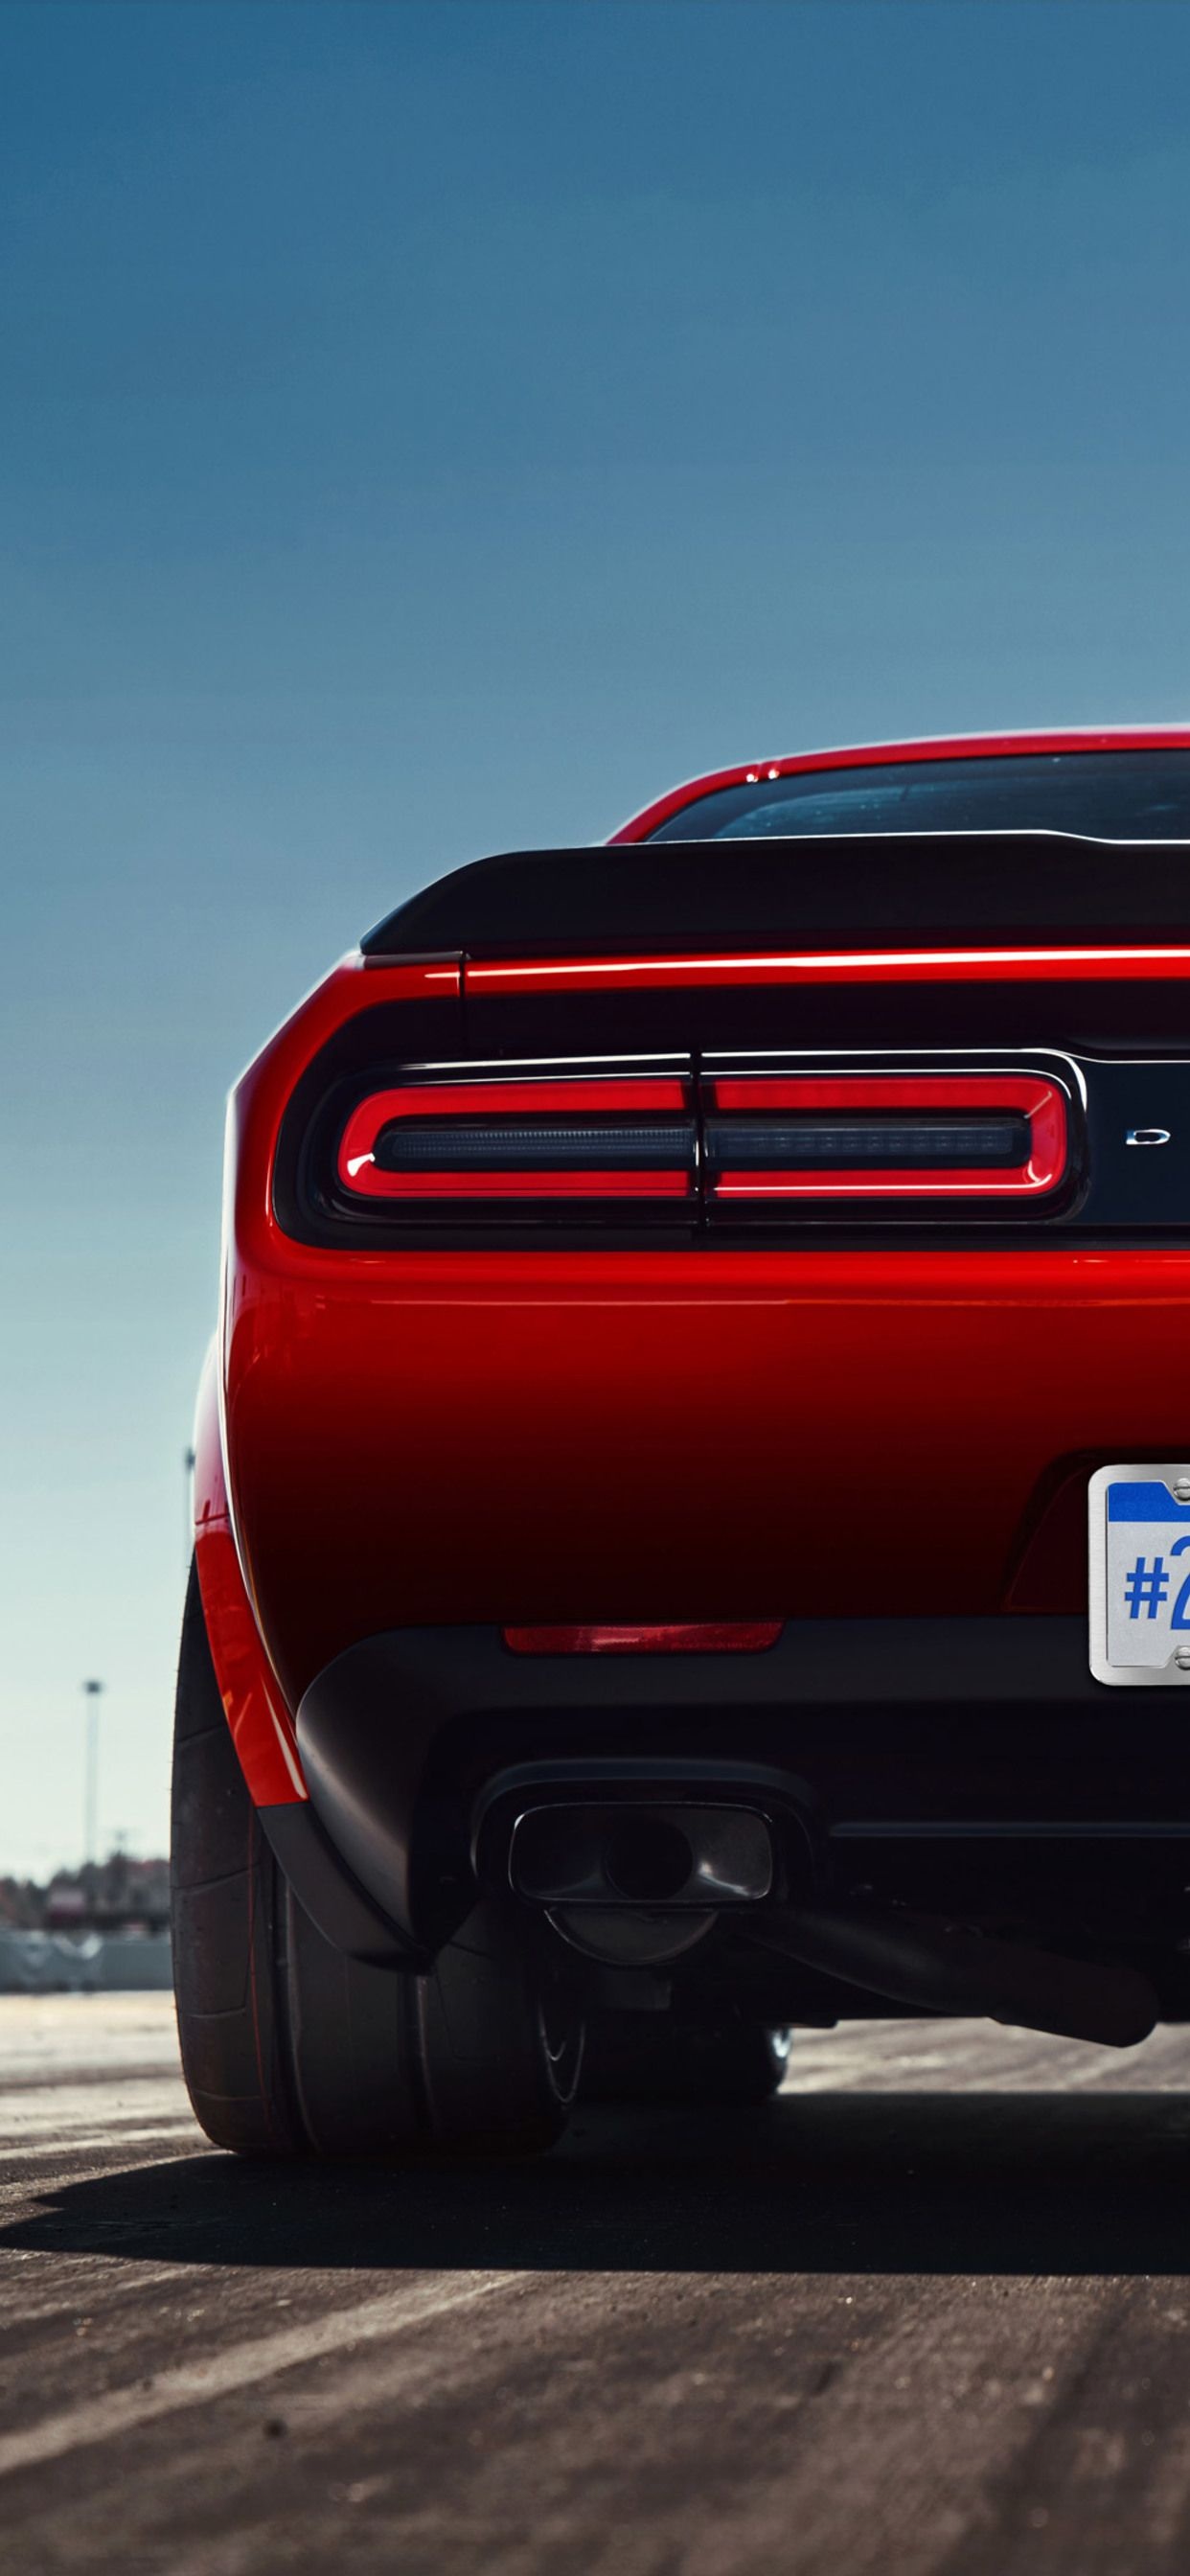 Dodge Challenger, High-quality iPhone wallpapers, Sleek and stylish, 1250x2690 HD Phone